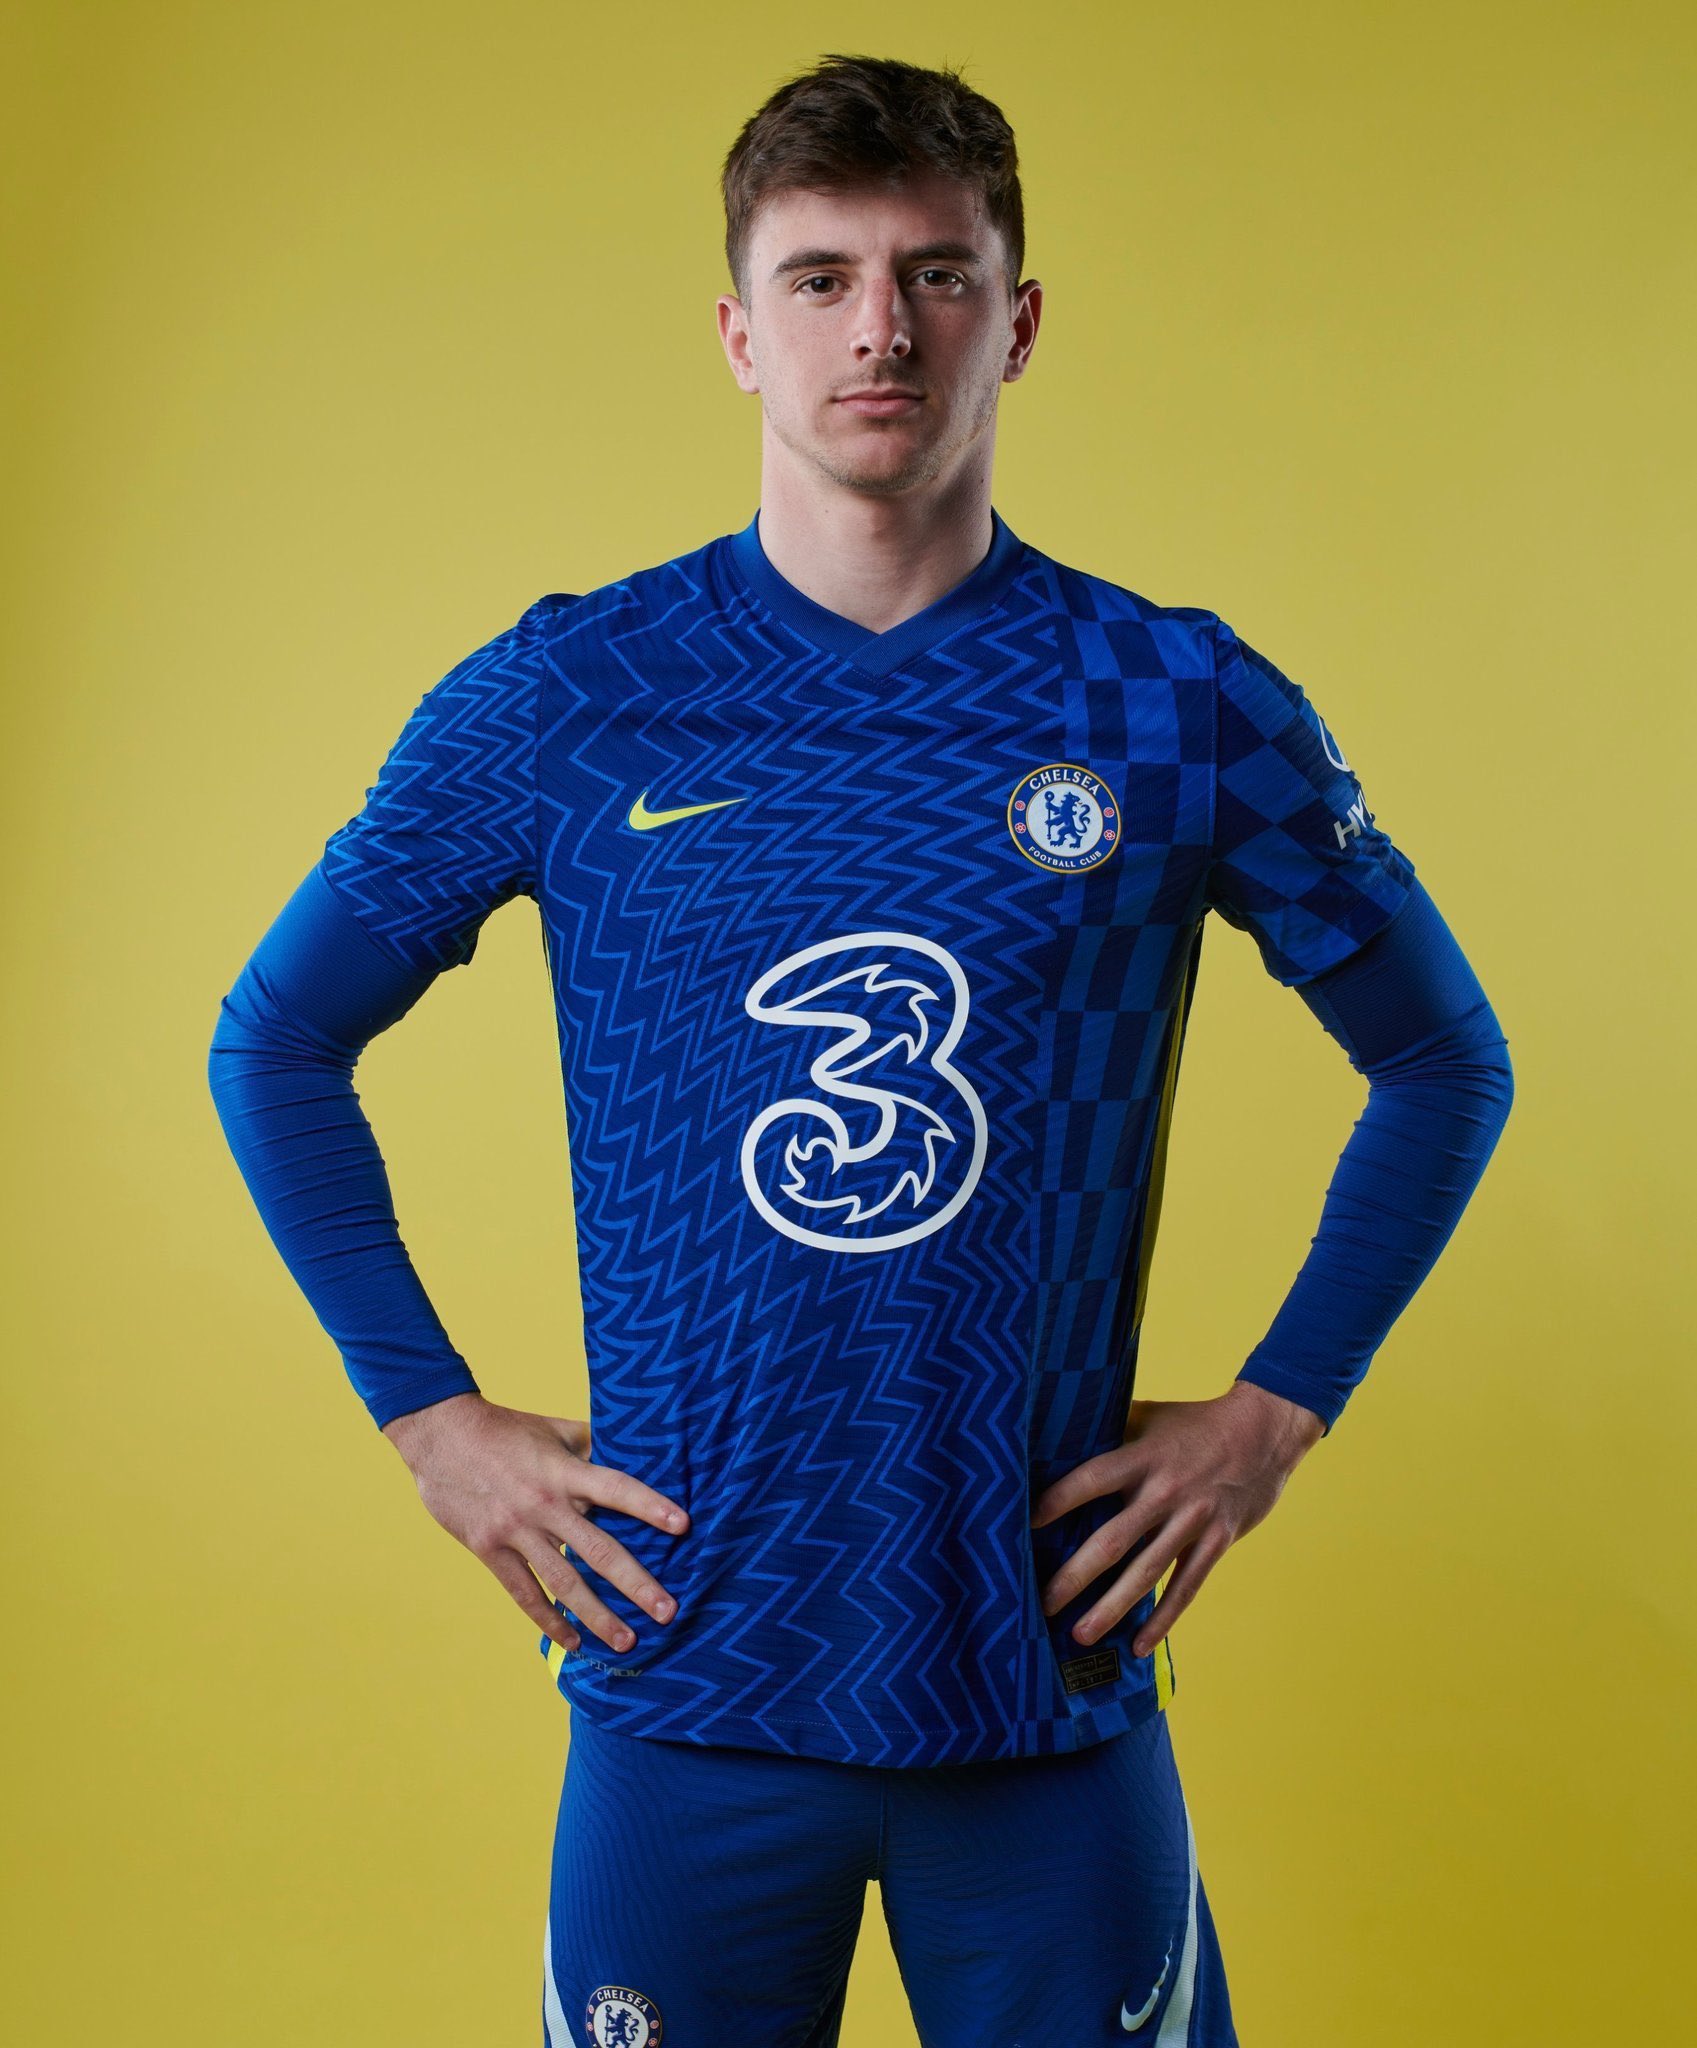 2021-22 Chelsea home kit pictures